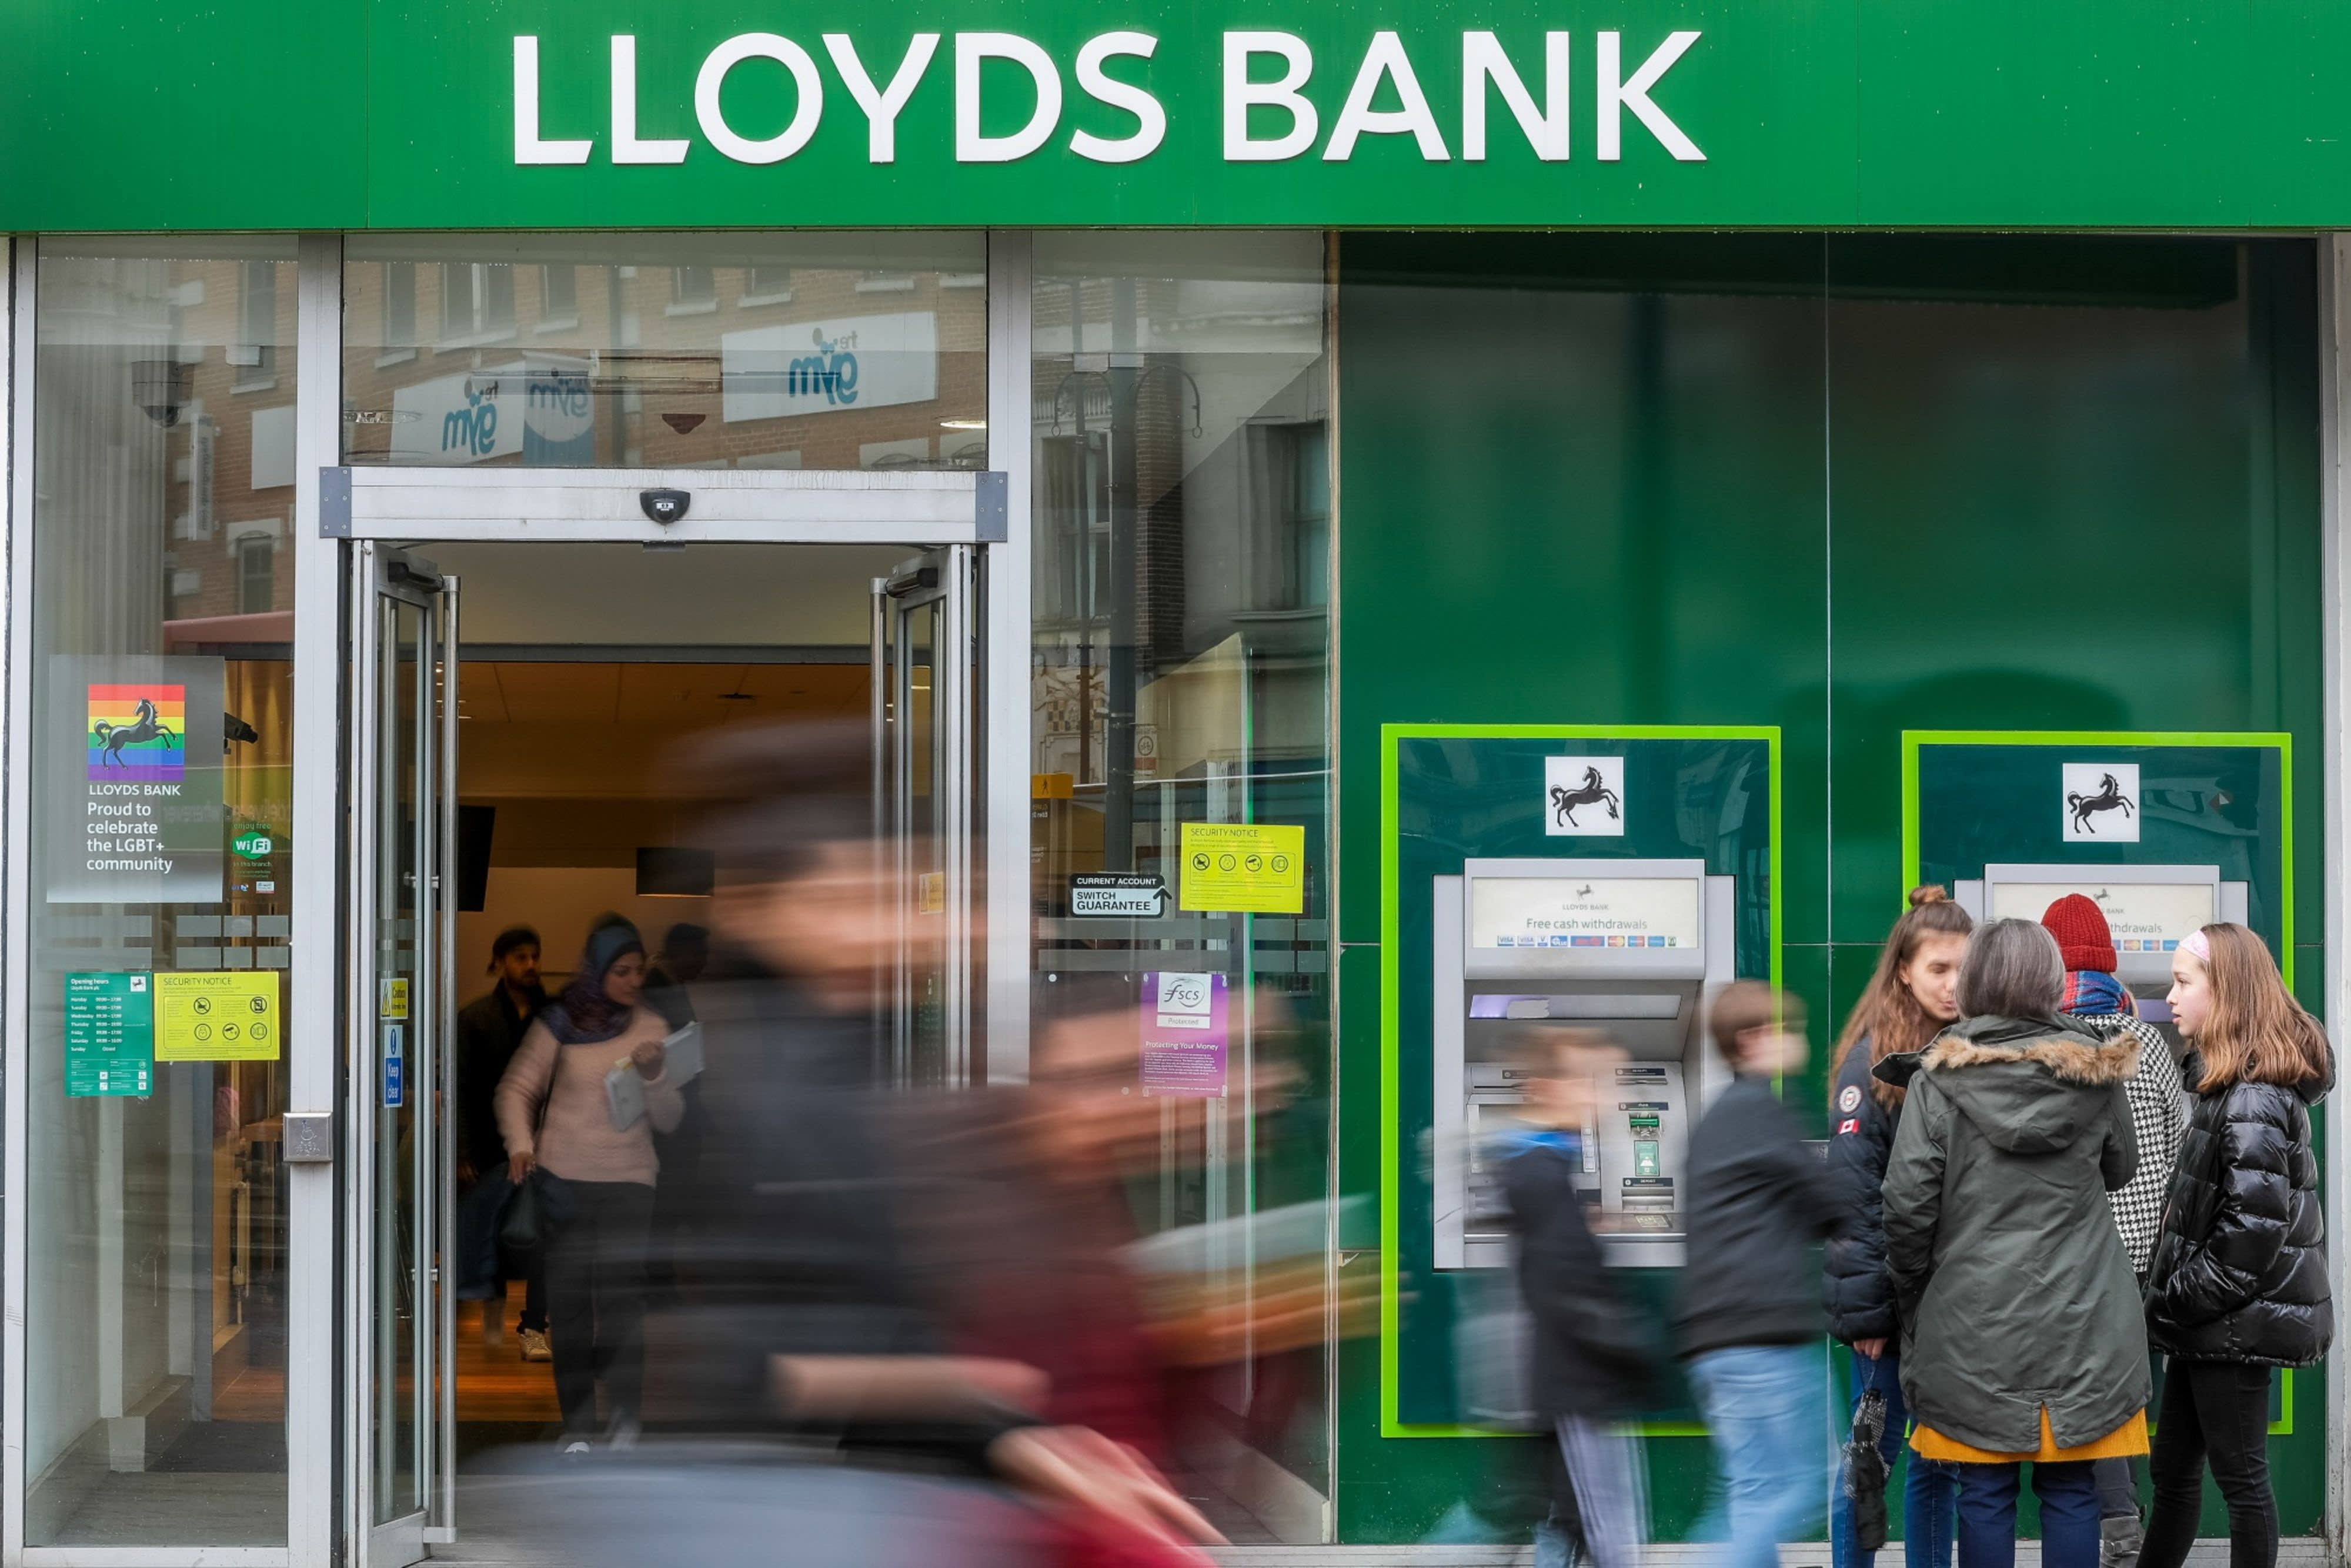 Embark sales total £3bn since Lloyds acquisition